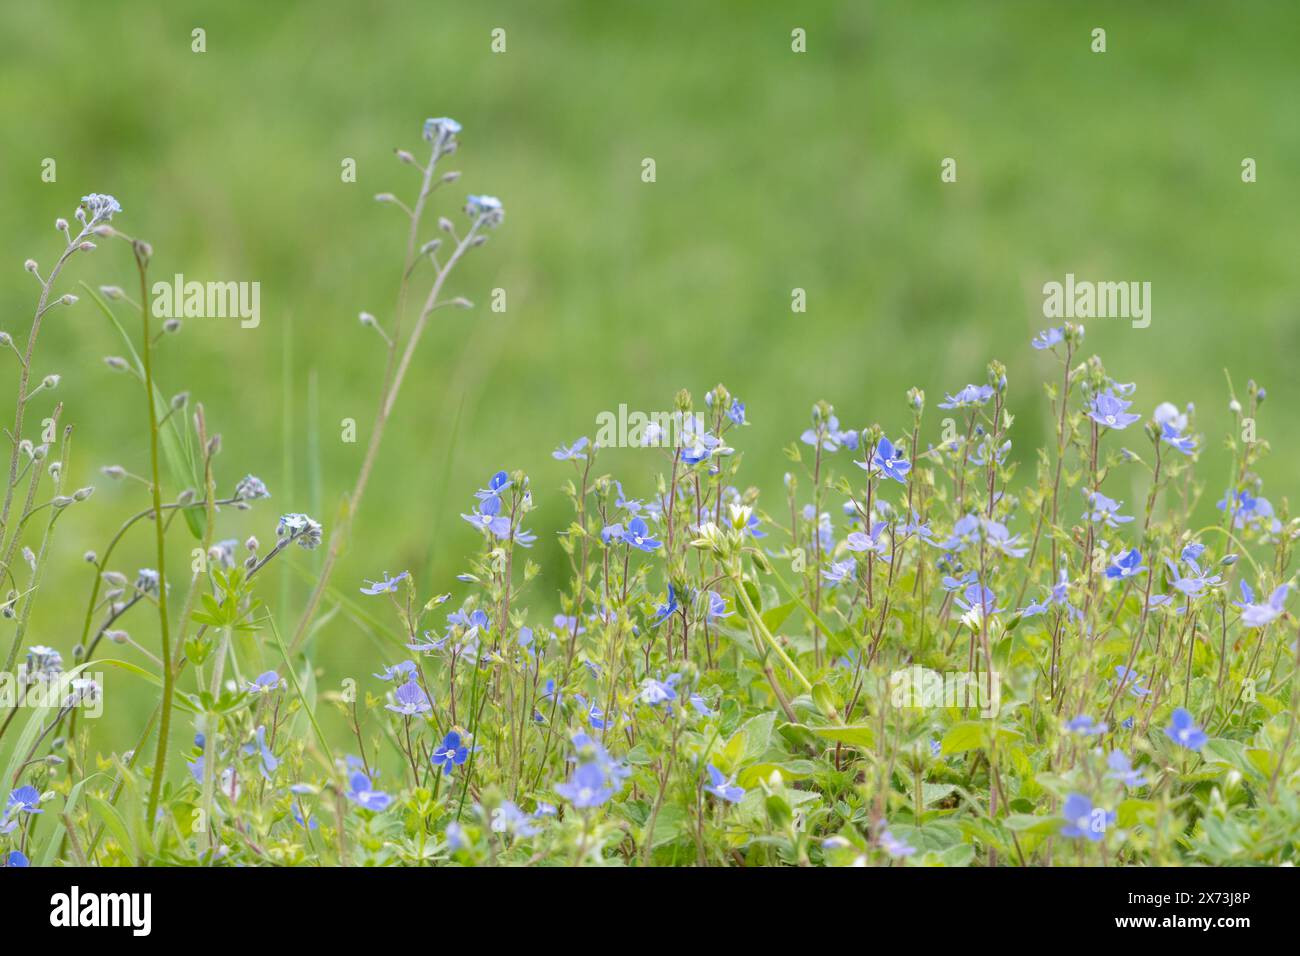 Blue wildflowers growing on an anthill in chalk grassland, including speedwell and forget-me-nots, England, UK, during May Stock Photo